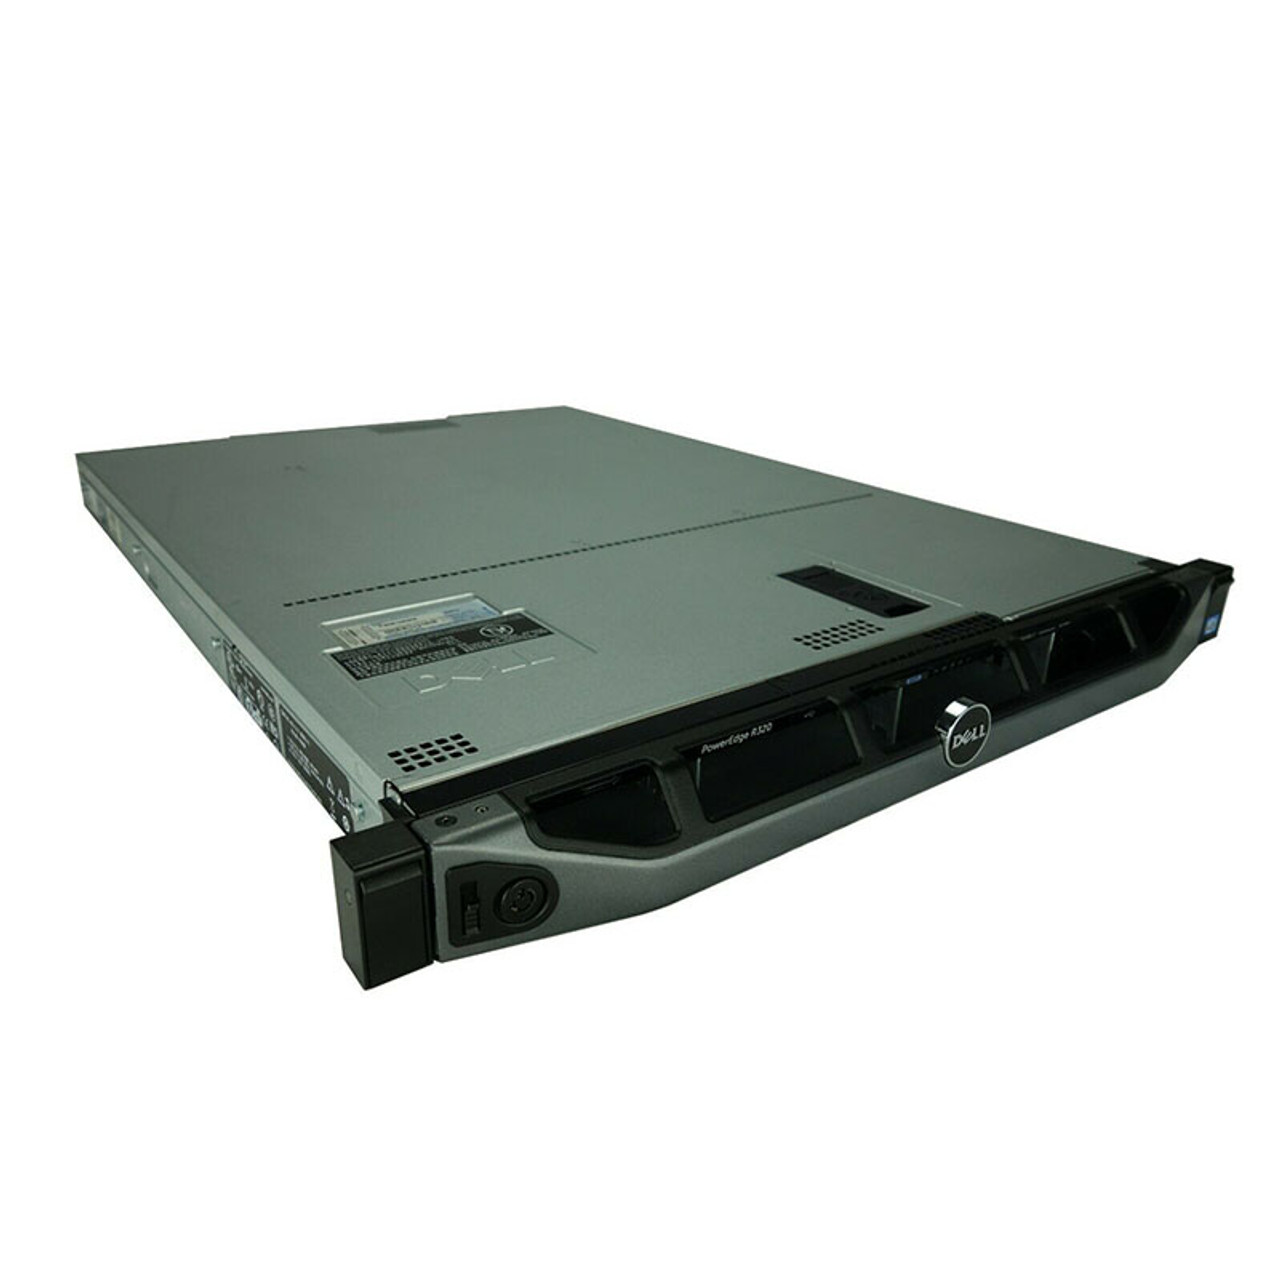 Dell EMC 12G PowerEdge R320 - 4 Bay 3.5 Inch Large Form Factor - 1U Server  - Configure to Order